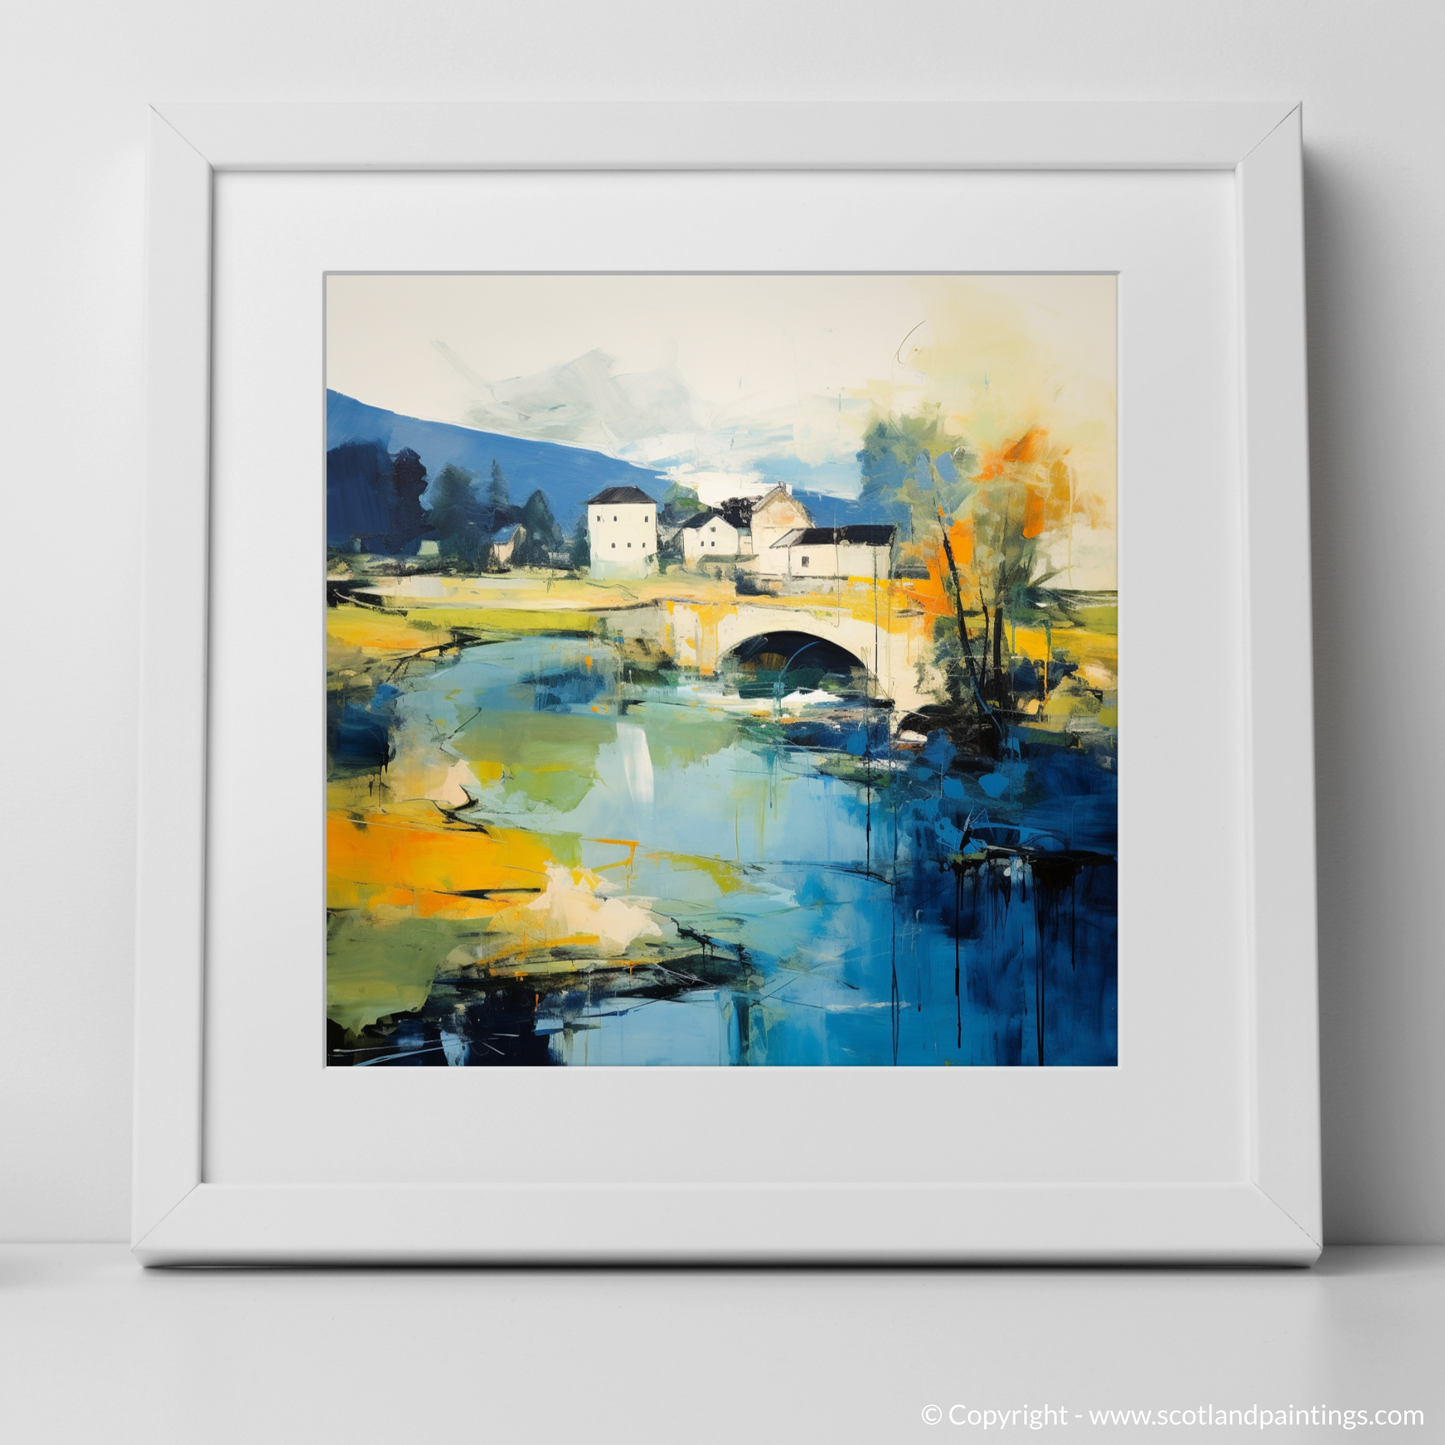 Art Print of River Almond, Edinburgh in summer with a white frame